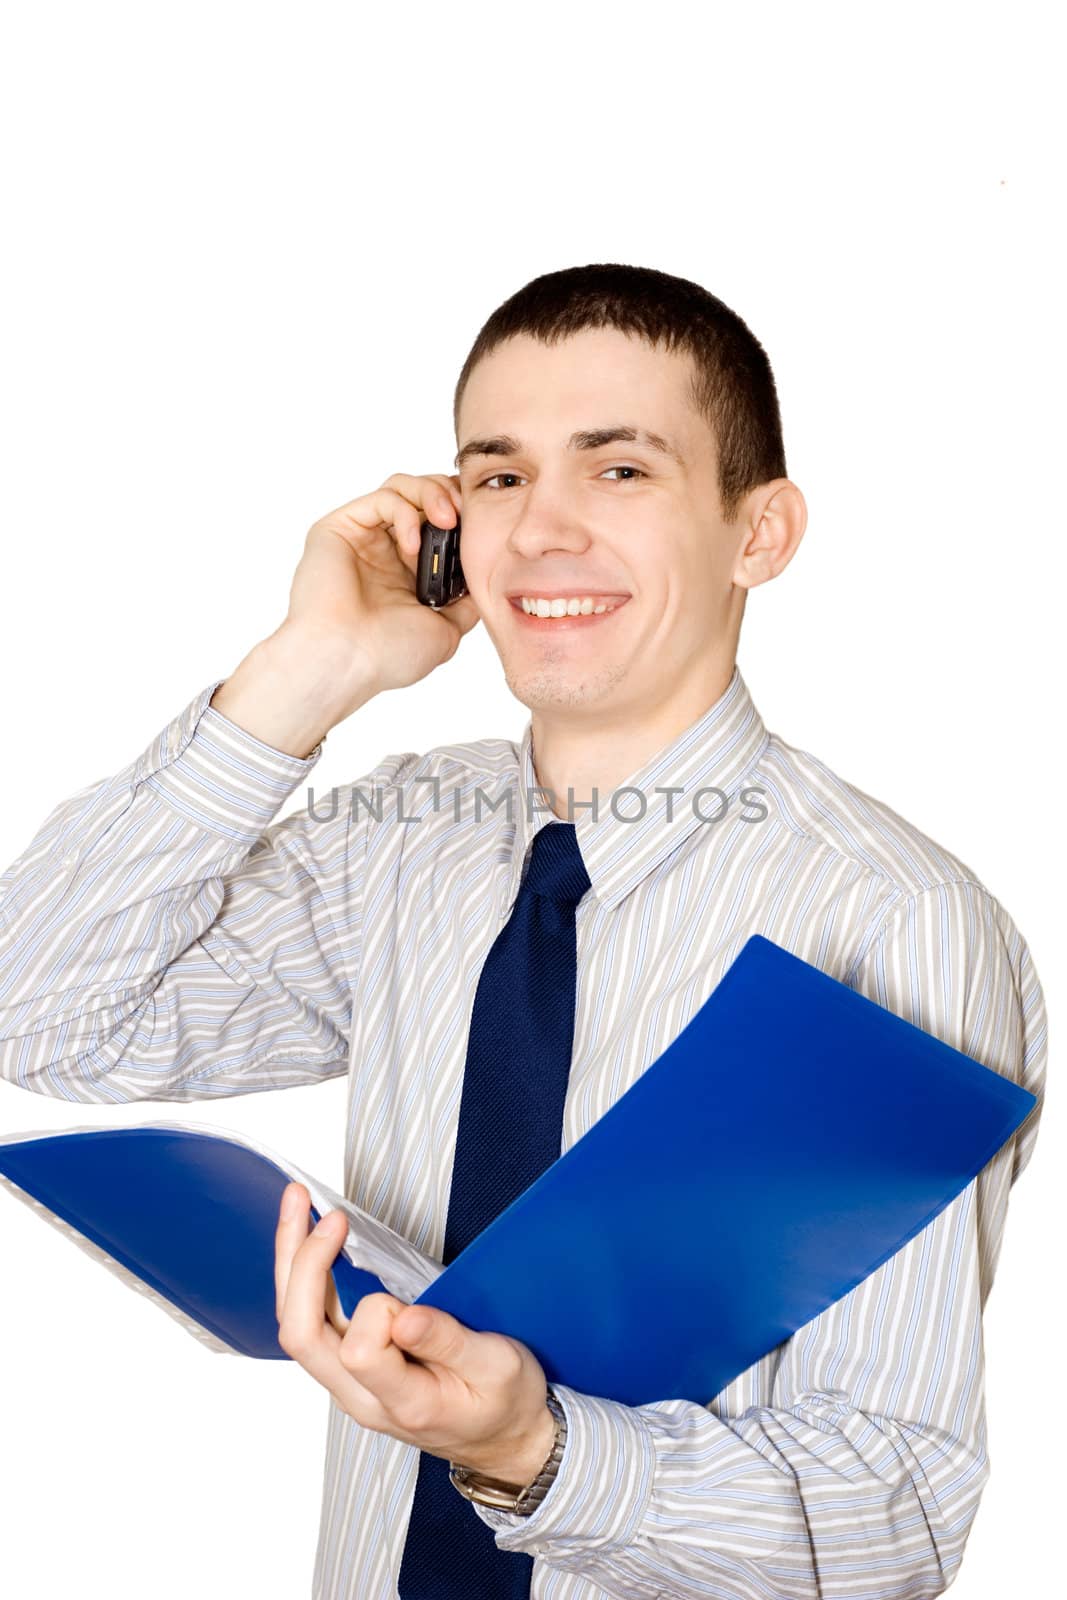 The young man holds in a hand a blue folder with documents and speaks by mobile phone